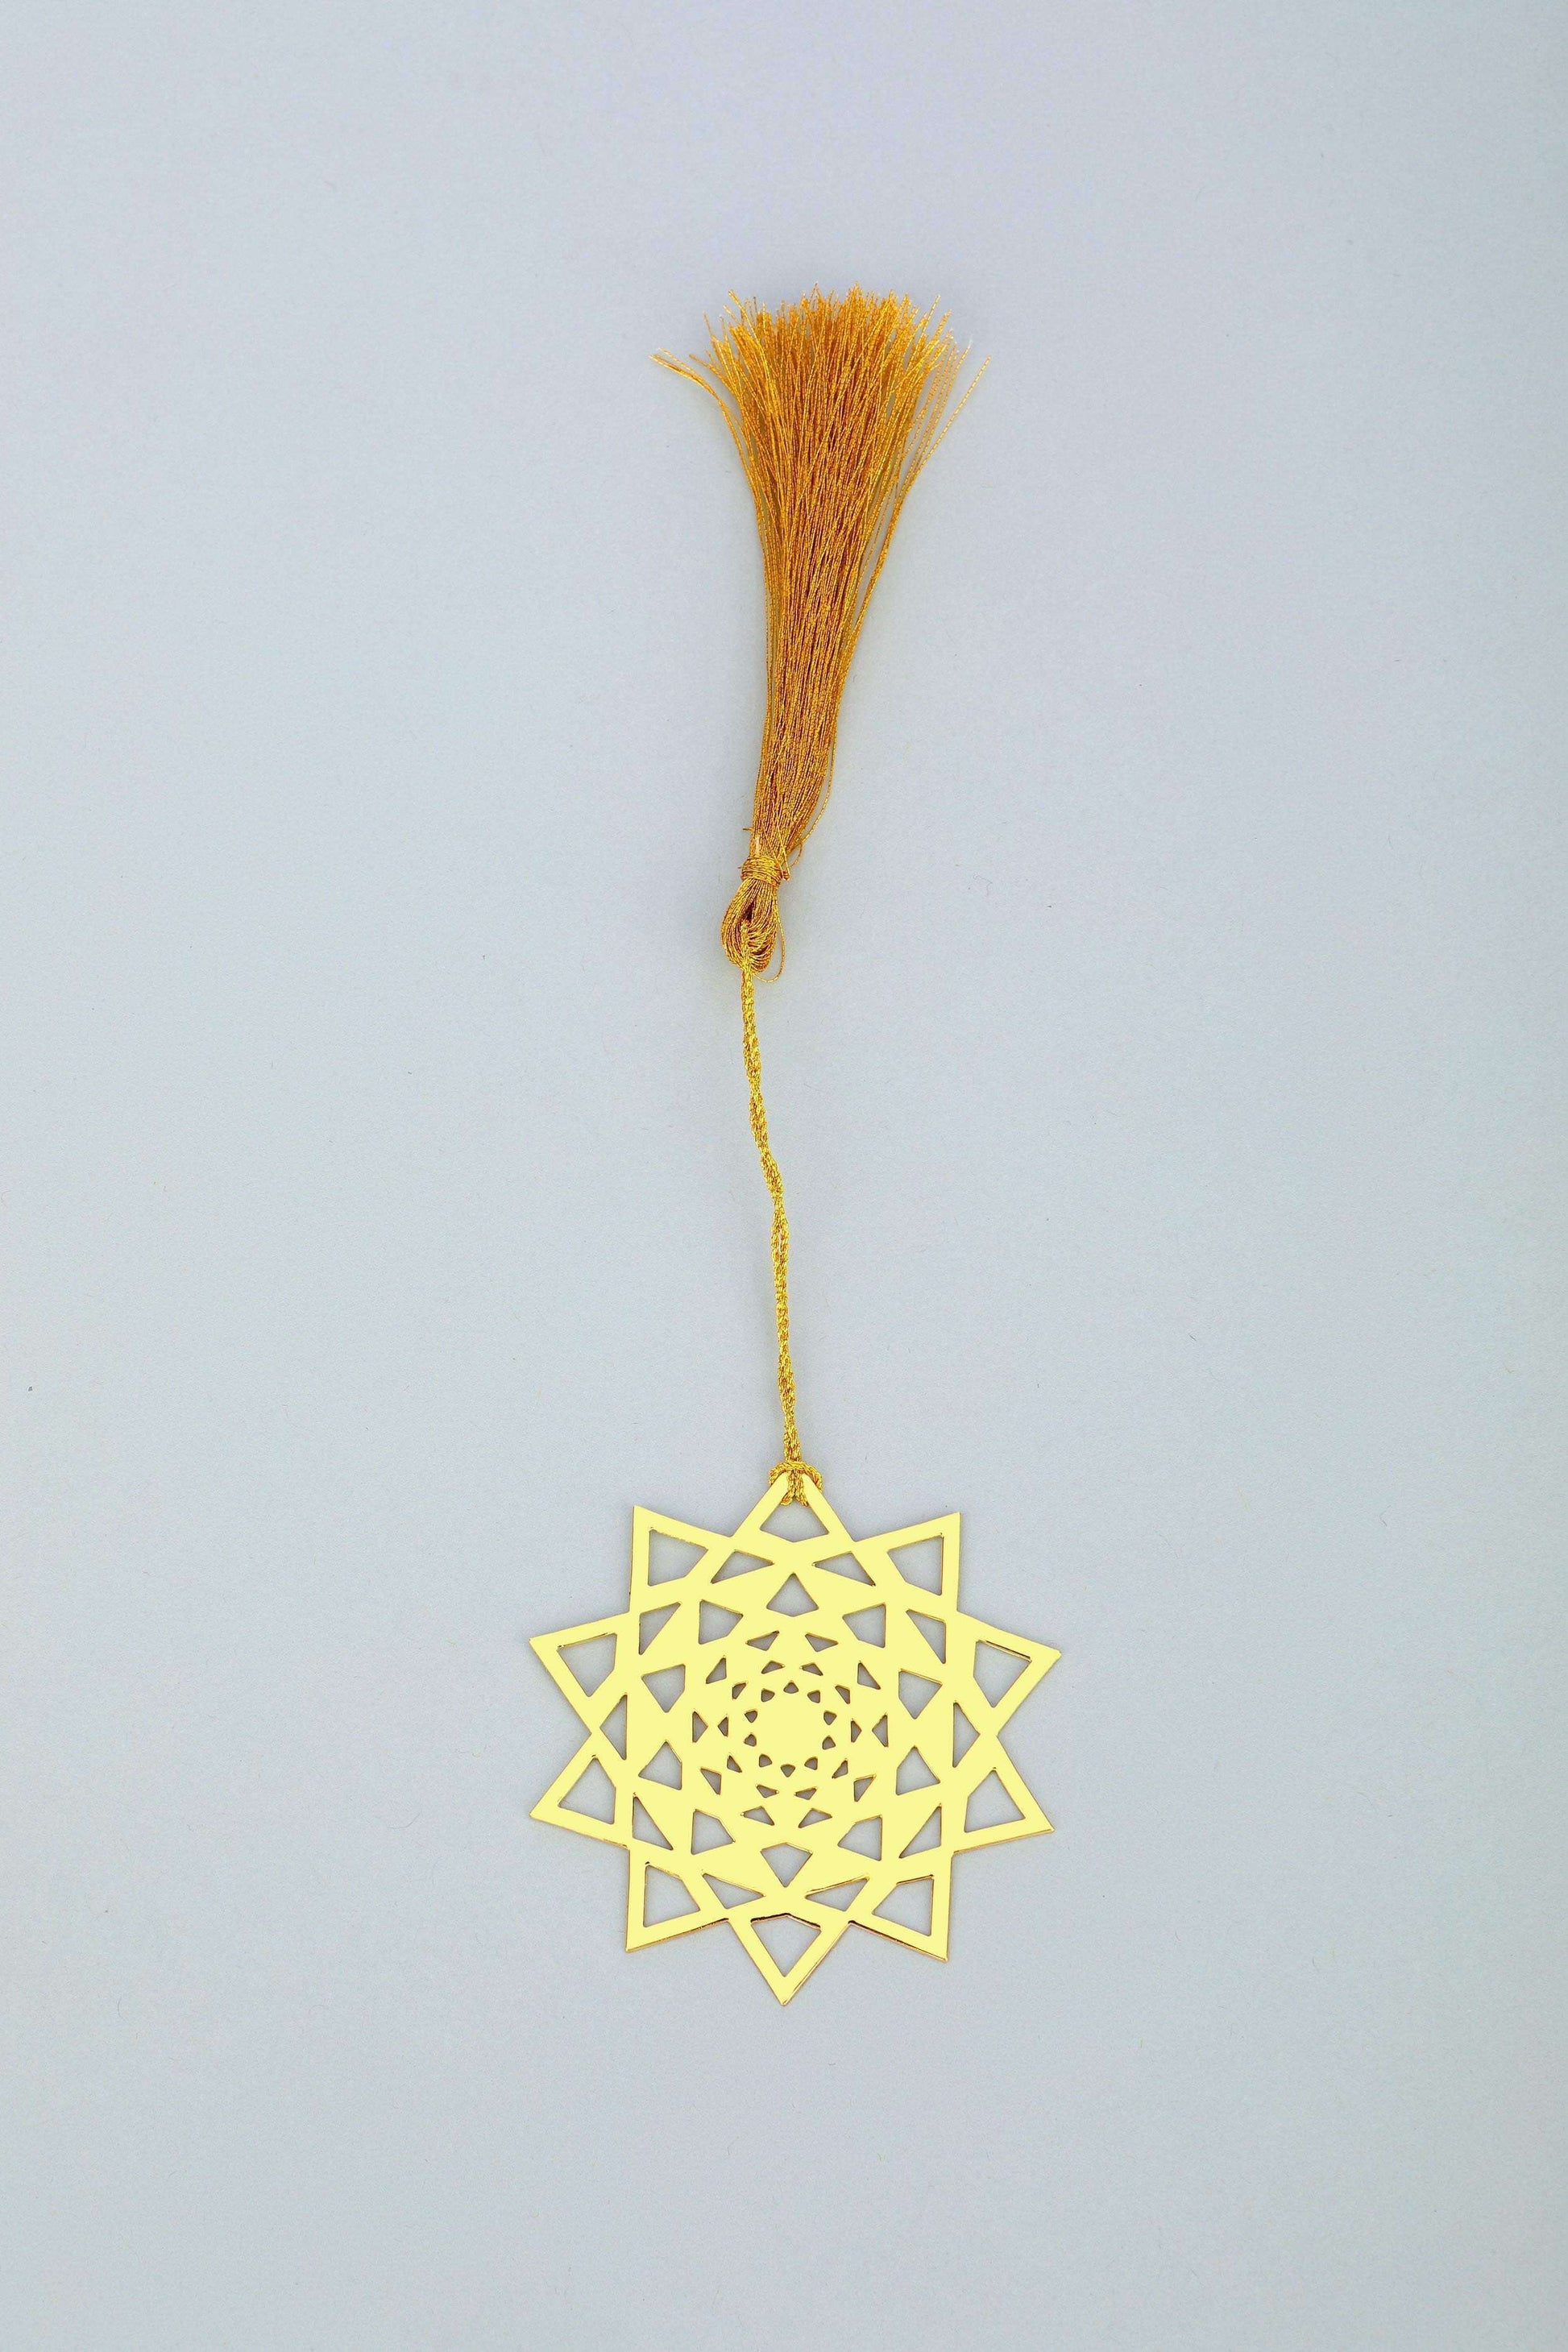 Concentric Triangles Golden Brass Metal Bookmark with Golden Tassel - artystagallery